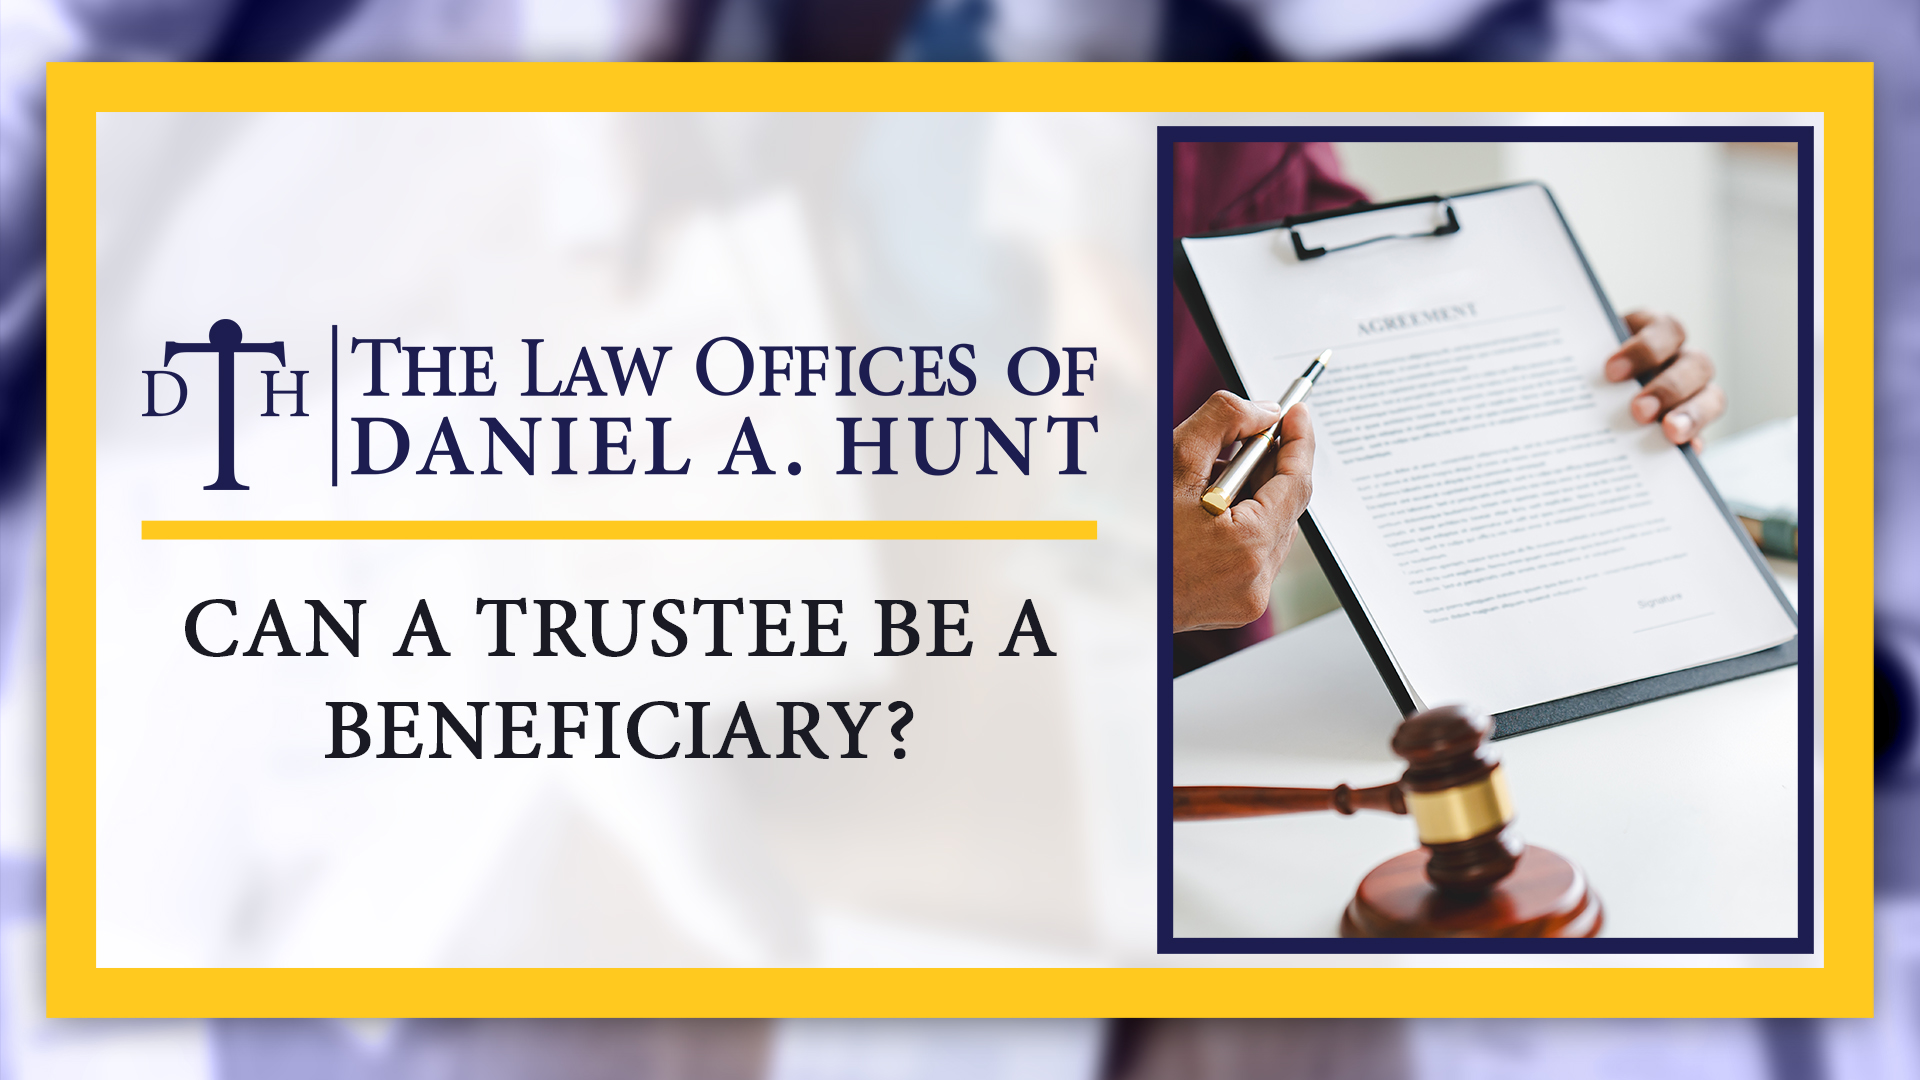 Can a Trustee Be a Beneficiary